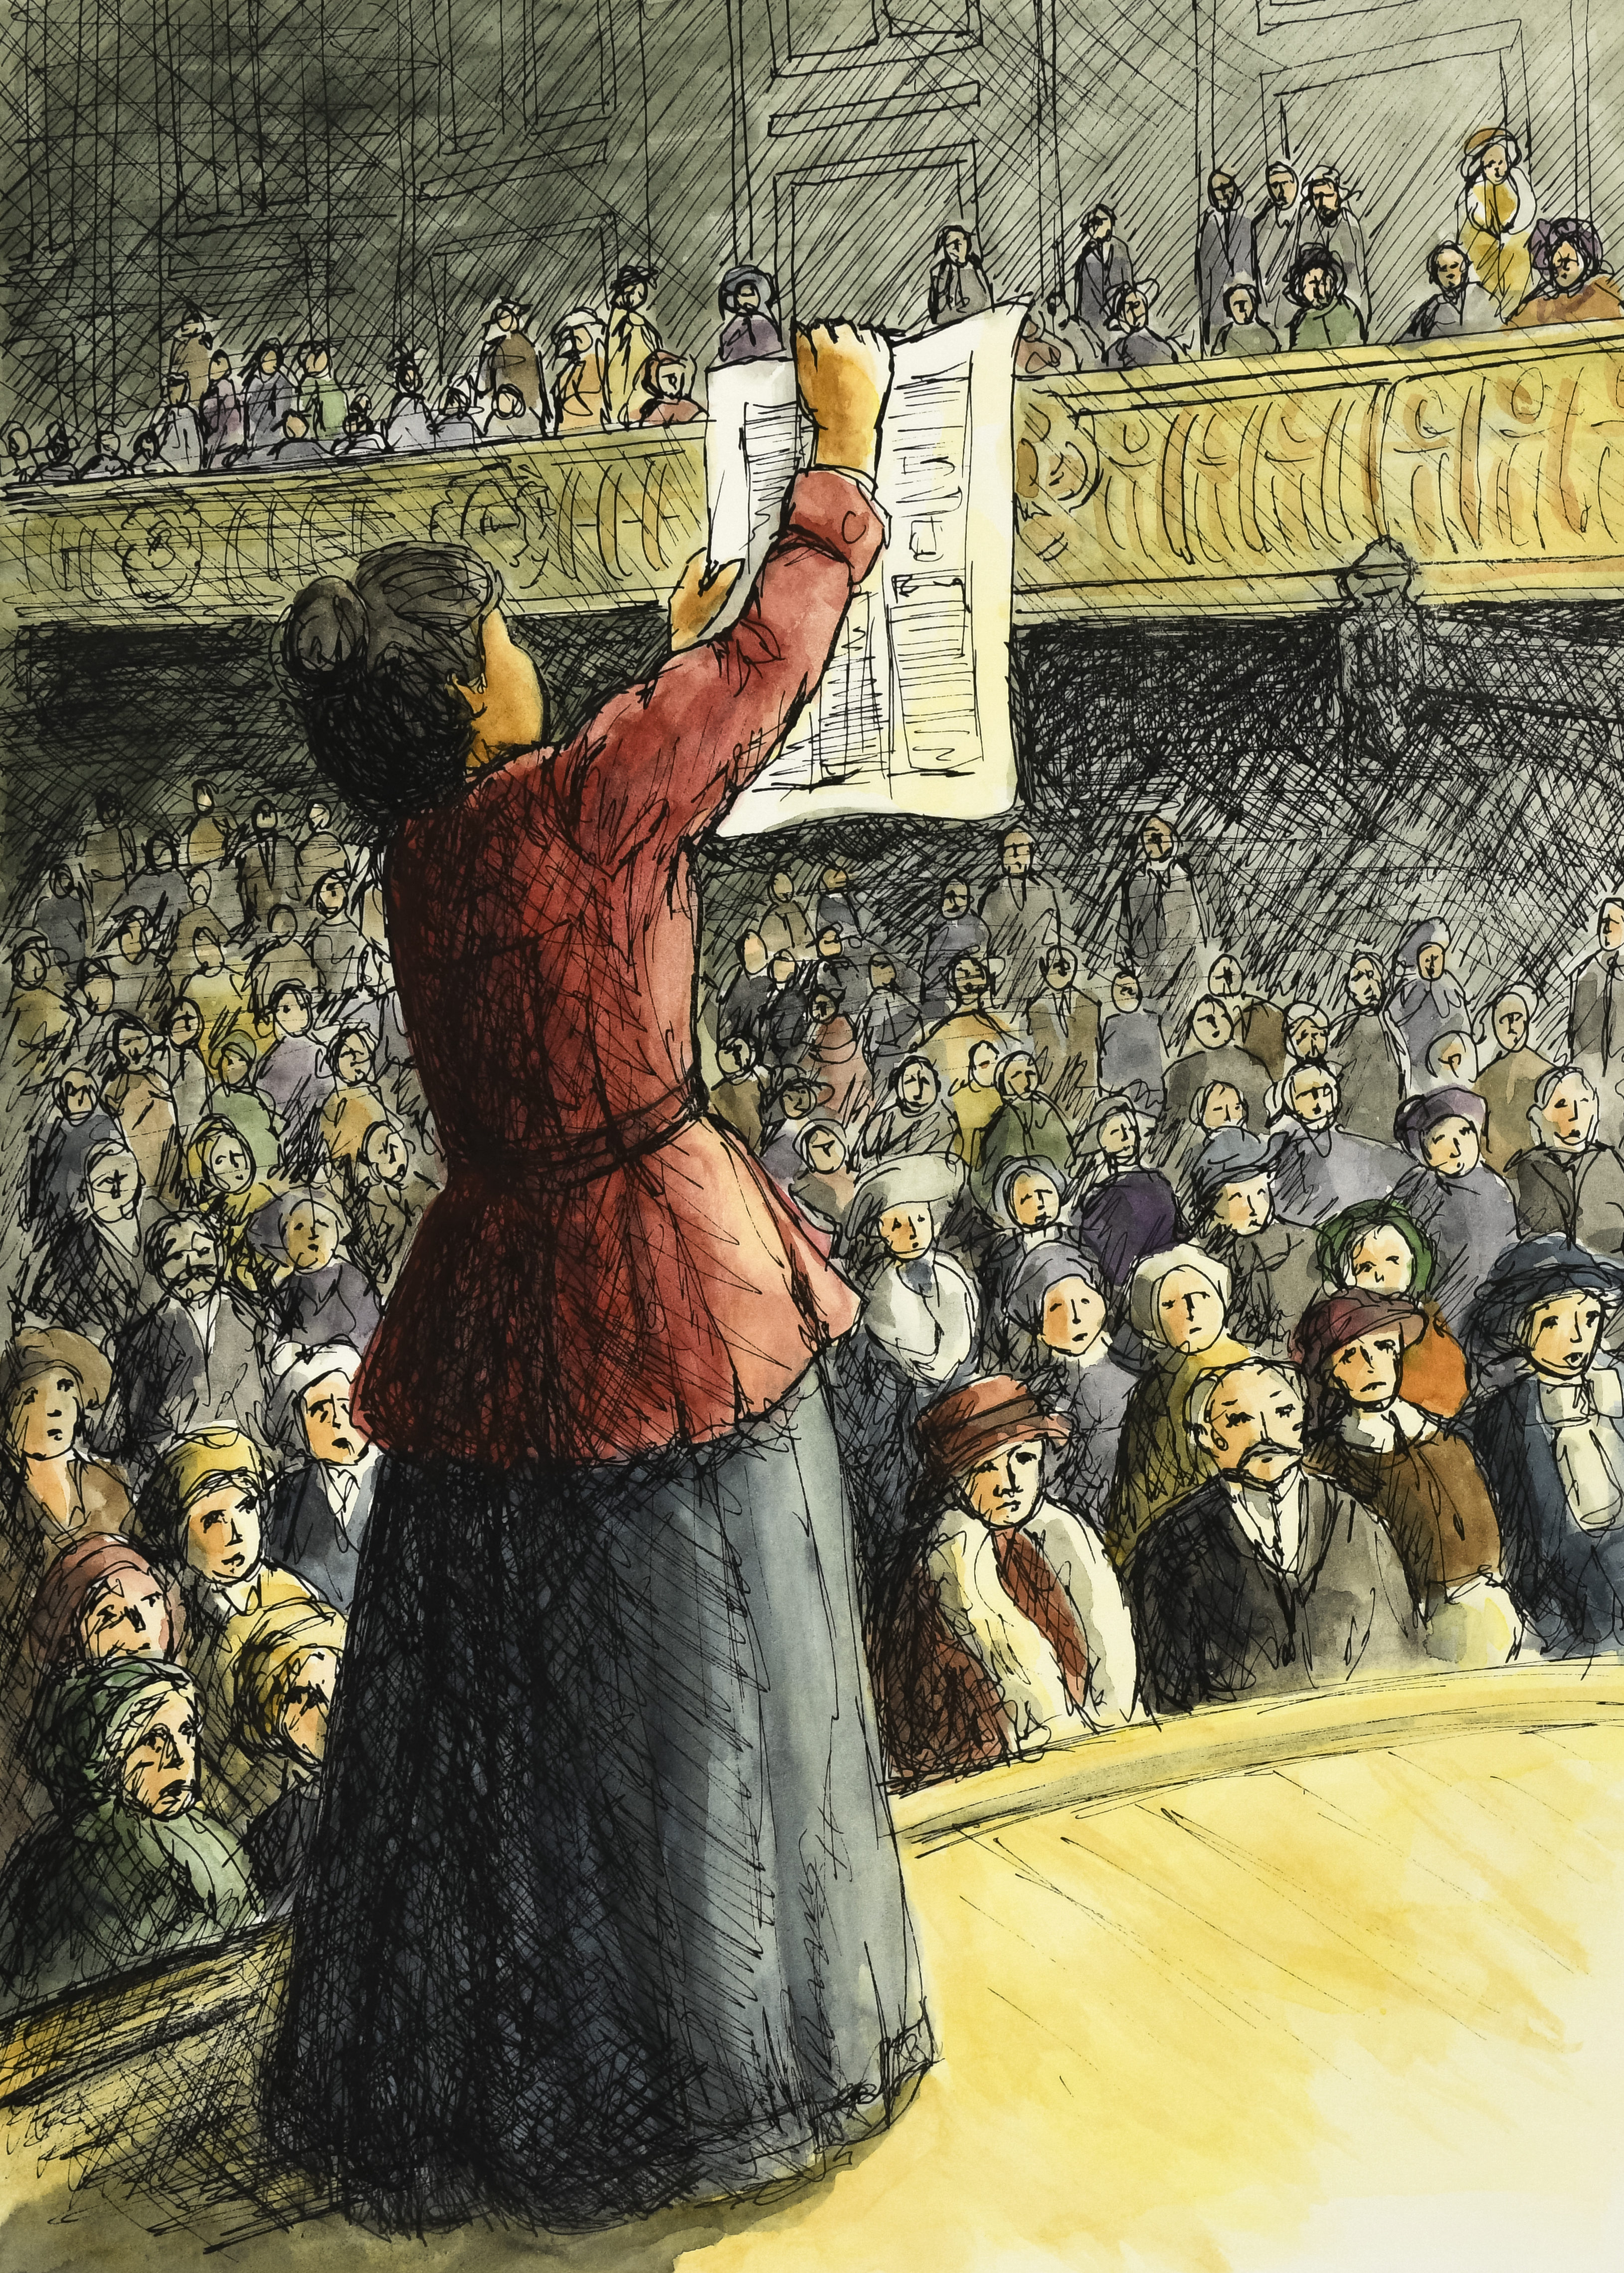 Illustration of woman reading paper to crowd.